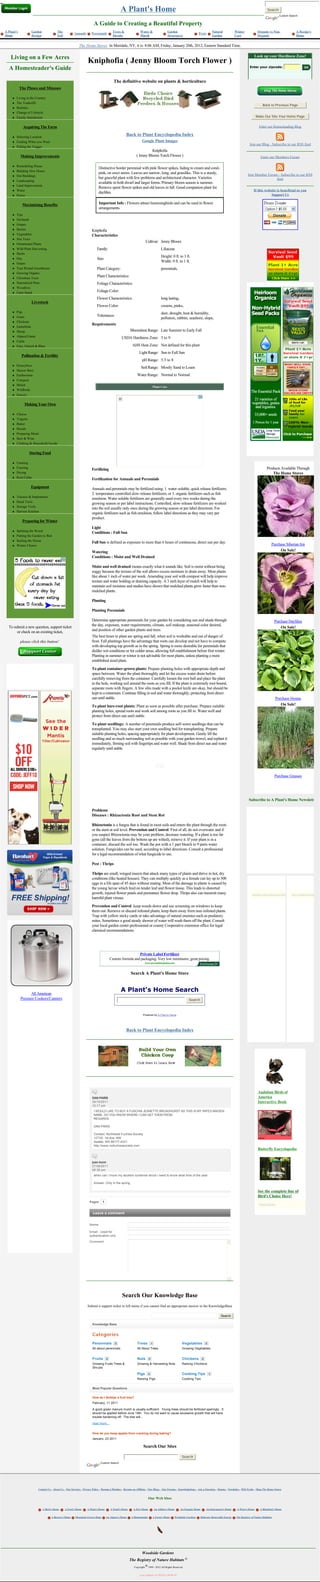 A Plant's Home                                                                                                                      Search
                                                                                                                                                                                                                                             Custom Search


                                                                          A Guide to Creating a Beautiful Property
A Plant's          Garden               The                                              Trees &                Water &                        Garden                                   Natural        Winter             Organic vs Non-                A Recipe's
                                                      Annuals        Perennials                                                                                          Pests
Home               Design               Soil                                             Shrubs                 Marsh                          Structures                               Garden         Care               Organic                        Home


                                                          The Home Stores In Meridale, NY, it is: 8:06 AM, Friday, January 20th, 2012, Eastern Standard Time.

    Living on a Few Acres                                                                                                                                                                                              Look up your Hardiness Zone!
                                                                  Kniphofia ( Jenny Bloom Torch Flower )
  A Homesteader's Guide                                                                                                                                                                                            Enter your zipcode:                         



                                                                                          The definitive website on plants & horticulture                                                                                     Trees at Arborday.org

            The Pluses and Minuses

     l   Living in the Country
     l   The Tradeoffs
                                                                                                                                                                                                                              Back to Previous Page
     l   Realities
     l   Change of Lifestyle
     l   Family Satisfaction                                                                                                                                                                                            Make Our Site Your Home Page


              Acquiring The Farm                                                                                                                                                                                           Enter our Homesteading Blog

     l   Selecting Location
                                                                                                   Back to Plant Encyclopedia Index
     l   Finding What you Want                                                                                   Google Plant Images
                                                                                                                                                                                                                   Join our Blog - Subscribe to our RSS feed
     l   Pulling the Trigger
                                                                                                                       Kniphofia
            Making Improvements                                                                              ( Jenny Bloom Torch Flower )                                                                                    Enter our Members Forum

     l   Remodeling House
                                                                             Distinctive border perennial with pink flower spikes, fading to cream and coral-
     l   Building New House
                                                                             pink, on erect stems. Leaves are narrow, long, and grasslike. This is a sturdy,                                                      Join Member Forum - Subscribe to our RSS
     l   Out Buildings
                                                                             but graceful plant with few problems and architectural character. Varieties                                                                           feed
     l   Landscaping
                                                                             available in both dwarf and larger forms. Primary bloom season is summer.
     l   Land Improvement
                                                                             Remove spent flower spikes and old leaves in fall. Good companion plant for
     l   Water                                                                                                                                                                                                         If this website is beneficial to you
                                                                             daylilies.
     l   Power                                                                                                                                                                                                                     Support Us

             Maximizing Benefits                                             Important Info : Flowers attract hummingbirds and can be used in flower
                                                                             arrangements.
     l   Tips
     l   Orchards
     l   Grapes
     l   Berries                                                     Kniphofia
     l   Vegetables                                                  Characteristics
     l   Nut Trees
                                                                                                                       Cultivar: Jenny Bloom  
     l   Ornamental Plants
     l   Wild Plant Harvesting                                              Family:                                                     Liliaceae  
     l   Herbs
                                                                                                                                        Height: 0 ft. to 3 ft.
     l   Hay                                                                Size:
                                                                                                                                        Width: 0 ft. to 1 ft.  
     l   Grains
     l   Year Round Greenhouse                                              Plant Category:                                             perennials,  
     l   Growing Organic
     l   Christmas Trees
                                                                            Plant Characteristics:                                       
     l   Naturalized Plots                                                  Foliage Characteristics:                                     
     l   Woodlots
     l   Farm Stand                                                         Foliage Color:                                               
                                                                            Flower Characteristics:                                     long lasting,  
                   Livestock
                                                                            Flower Color:                                               creams, pinks,  
     l   Pigs                                                                                                                           deer, drought, heat & humidity,
     l   Goats                                                              Tolerances:
                                                                                                                                        pollution, rabbits, seashore, slope,  
     l   Chickens
                                                                     Requirements
     l   Gamebirds
     l   Sheep                                                                                          Bloomtime Range: Late Summer to Early Fall  
     l   Alpaca/Llama                                                                           USDA Hardiness Zone: 5 to 9  
     l   Cattle
     l   Emu, Ostrich & Rhea                                                                             AHS Heat Zone: Not defined for this plant  
                                                                                                               Light Range: Sun to Full Sun  
             Pollination & Fertility
                                                                                                                 pH Range: 5.5 to 8  
     l   Honeybees
                                                                                                                Soil Range: Mostly Sand to Loam  
     l   Mason Bees
     l   Earthworms                                                                                          Water Range: Normal to Normal  
     l   Compost
     l   Mulch
                                                                                                                                  Plant Care
     l   Wildbirds
     l   Insects

              Making Your Own

     l   Cheese
     l   Yogurts
     l   Butter
     l   Breads
     l   Preparing Meats
     l   Beer & Wine
     l   Clothing & Household Goods

                  Storing Food

     l   Canning
     l   Freezing                                                                                                                                                                                                                 Products Available Through
                                                                     Fertilizing
     l   Drying                                                                                                                                                                                                                       The Home Stores
     l   Root Cellar
                                                                     Fertilization for Annuals and Perennials
                   Equipment                                         Annuals and perennials may be fertilized using: 1. water-soluble, quick release fertilizers;
                                                                     2. temperature controlled slow-release fertilizers; or 3. organic fertilizers such as fish
     l   Tractors & Implements
                                                                     emulsion. Water soluble fertilizers are generally used every two weeks during the
     l   Hand Tools
                                                                     growing season or per label instructions. Controlled, slow-release fertilizers are worked
     l   Storage Tools
                                                                     into the soil usually only once during the growing season or per label directions. For
     l   Harvest Kitchen
                                                                     organic fertilizers such as fish emulsion, follow label directions as they may vary per
                                                                     product.
             Preparing for Winter
                                                                     Light
     l   Splitting the Wood
                                                                     Conditions : Full Sun
     l   Putting the Garden to Bed
     l   Sealing the House
                                                                     Full Sun is defined as exposure to more than 6 hours of continuous, direct sun per day.
     l   Winter Chores                                                                                                                                                                                                                Purchase Siberian Iris
                                                                     Watering                                                                                                                                                              On Sale!
                                                                     Conditions : Moist and Well Drained

                                                                     Moist and well drained means exactly what it sounds like. Soil is moist without being
                                                                     soggy because the texture of the soil allows excess moisture to drain away. Most plants
                                                                     like about 1 inch of water per week. Amending your soil with compost will help improve
                                                                     texture and water holding or draining capacity. A 3 inch layer of mulch will help to
                                                                     maintain soil moisture and studies have shown that mulched plants grow faster than non-
                                                                     mulched plants.

                                                                     Planting

                                                                     Planting Perennials

                                                                     Determine appropriate perennials for your garden by considering sun and shade through                                                                                Purchase Daylilies
                                                                     the day, exposure, water requirements, climate, soil makeup, seasonal color desired,
  To submit a new question, support ticket                                                                                                                                                                                                    On Sale!
                                                                     and position of other garden plants and trees.
       or check on an existing ticket,
                                                                     The best times to plant are spring and fall, when soil is workable and out of danger of
            please click this button!                                frost. Fall plantings have the advantage that roots can develop and not have to compete
                                                                     with developing top growth as in the spring. Spring is more desirable for perennials that
                                                                     dislike wet conditions or for colder areas, allowing full establishment before first winter.
                                                                     Planting in summer or winter is not advisable for most plants, unless planting a more
                                                                     established sized plant.

                                                                     To plant container-grown plants: Prepare planting holes with appropriate depth and
                                                                     space between. Water the plant thoroughly and let the excess water drain before
                                                                     carefully removing from the container. Carefully loosen the root ball and place the plant
                                                                     in the hole, working soil around the roots as you fill. If the plant is extremely root bound,
                                                                     separate roots with fingers. A few slits made with a pocket knife are okay, but should be
                                                                     kept to a minimum. Continue filling in soil and water thoroughly, protecting from direct
                                                                     sun until stable.                                                                                                                                                    Purchase Hostas
                                                                     To plant bare-root plants: Plant as soon as possible after purchase. Prepare suitable                                                                                   On Sale!
                                                                     planting holes, spread roots and work soil among roots as you fill in. Water well and
                                                                     protect from direct sun until stable.

                                                                     To plant seedlings: A number of perennials produce self-sown seedlings that can be
                                                                     transplanted. You may also start your own seedling bed for transplanting. Prepare
                                                                     suitable planting holes, spacing appropriately for plant development. Gently lift the
                                                                     seedling and as much surrounding soil as possible with your garden trowel, and replant it
                                                                     immediately, firming soil with fingertips and water well. Shade from direct sun and water
                                                                     regularly until stable.




                                                                                                                                                                                                                                          Purchase Grasses




                                                                                                                                                                                                                  Subscribe to A Plant's Home Newsletter

                                                                     Problems
                                                                     Diseases : Rhizactonia Root and Stem Rot

                                                                     Rhizoctonia is a fungus that is found in most soils and enters the plant through the roots
                                                                     or the stem at soil level. Prevention and Control: First of all, do not overwater and if
                                                                     you suspect Rhizoctonia may be your problem, decrease watering. If a plant is too far
                                                                     gone (all the leaves from the bottom up are wilted), remove it. If your plant is in a
                                                                     container, discard the soil too. Wash the pot with a 1 part bleach to 9 parts water
                                                                     solution. Fungicides can be used, according to label directions. Consult a professional
                                                                     for a legal recommendation of what fungicide to use.

                                                                     Pest : Thrips

                                                                     Thrips are small, winged insects that attack many types of plants and thrive in hot, dry
                                                                     conditions (like heated houses). They can multiply quickly as a female can lay up to 300
                                                                     eggs in a life span of 45 days without mating. Most of the damage to plants is caused by
                                                                     the young larvae which feed on tender leaf and flower tissue. This leads to distorted
                                                                     growth, injured flower petals and premature flower drop. Thrips also can transmit many                                                          payday cash advance loan        very cheap tramadol
                                                                     harmful plant viruses.

                                                                     Prevention and Control: keep weeds down and use screening on windows to keep
                                                                     them out. Remove or discard infested plants, keep them away from non-infested plants.
                                                                     Trap with yellow sticky cards or take advantage of natural enemies such as predatory
                                                                     mites. Sometimes a good steady shower of water will wash them off the plant. Consult
                                                                     your local garden center professional or county Cooperative extension office for legal
                                                                     chemical recommendations.




                                                                                                                Private Label Fertilizer
                                                                                        Custom formula and packaging. Very low minimums, great pricing.
                                                                                                                       www.privatelabelgarden.com



                                                                                                        Search A Plant's Home Store


                                                                                               A Plant's Home Search
                  All American
            Pressure Cookers/Canners                                                                                                                            Search



                                                                                                                  Powered by A Plant's Home




                                                                                                   Back to Plant Encyclopedia Index




                                                                                                                                                                                                                          Audubon Birds of
                                                                      DAN PARIS                                                                                                                                           America
                                                                      30/10/2011                                                                                                                                          Interactive Book
                                                                      10:17 pm
                                                                          I WOULD LIKE TO BUY A FUSCHIA JEANETTE BROADHURST AS THIS IS MY WIFES MAIDEN
                                                                          NAME, DO YOU KNOW WHERE I CAN GET THEM FROM.
                                                                          REGARDS

                                                                          DAN PARIS

                                                                          Contact: Northwest Fuchsia Society
                                                                          12735- 1st Ave. NW
                                                                          Seattle, WA 98177-4221
                                                                          http://www.nwfuchsiasociety.com
                                                                                                                                                                                                                          Butterfly Encyclopedia


                                                                      joan bunn
                                                                      27/08/2011
                                                                      06:36 pm
                                                                          when can i move my abutilon suntense shrub i need to know what time of the year.

                                                                          Answer: Only in the spring.

                                                                                                                                                                                                                          See the complete line of
                                                                                                                                                                                                                          Bird's Choice Here!
                                                                   Pages:       1
                                                                                                                                                                                                                            Boys Games


                                                                      Leave a comment


                                                                   Name

                                                                   Email - Used for
                                                                   authentication only
                                                                   Comment




                                                                                                Search Our Knowledge Base
                                                                  Submit a support ticket in left menu if you cannot find an appropriate answer in the KnowledgeBase

                                                                                                                                                                                             Search

                                                                      Knowledge Base


                                                                      Categories
                                                                      Perennials           0                 Trees            1                            Vegetables           0
                                                                      All about perennials                   All About Trees                               Growing Vegetables

                                                                       
                                                                      Fruits        0                        Nuts         0                                Chickens         0
                                                                      Growing Fruits Trees &                 Growing & Harvesting Nuts                     Raising Chickens
                                                                      Shrubs

                                                                                                             Pigs        0                                 Cooking Tips             1
                                                                       
                                                                                                             Raising Pigs                                  Cooking Tips


                                                                      Most Popular Questions

                                                                      How do I fertilize a fruit tree?
                                                                      February, 11 2011

                                                                      A good green manure mulch is usually sufficient.  Young trees should be fertilized sparingly.  It 
                                                                      should be applied before June 15th.  You do not want to cause excessive growth that will have 
                                                                      trouble hardening off.  The tree will...

                                                                      read more...


                                                                      How do you keep apples from cracking during baking?
                                                                      January, 23 2011

                                                                                                                  Search Our Sites

                                                                                                                                                           Search
                                                                               Custom Search




                        Contact Us - About Us - Our Services - Privacy Policy - Become a Member - Become an Affiliate - Our Blogs - Our Forums - Knowledgebase - Ask a Question - Donate - Newsletter - RSS Feeds - Shop The Home Stores


                                                                                                                         Our Web Sites

                            A Bird's Home      A Fowl's Home     A Plant's Home         A Pond's Home     A Pet's Home            An Athlete's Home       An Organic Home       An Instrument's Home    A Wine's Home       A Bluebird's Home


                                   A Brewer's Home     Mountain Grown Hops          An Alpaca's Home     A Homesteader            A Farm's Home       Woodside Gardens    Delaware Renewable Energy     The Registry of Nature Habitats




                                                                                                                 Woodside Gardens
                                                                                                        The Registry of Nature Habitats
                                                                                                           Copyright     1999 - 2012 All Rights Reserved


                                                                                                               Last Updated: 01/20/2012 08:06:03
 